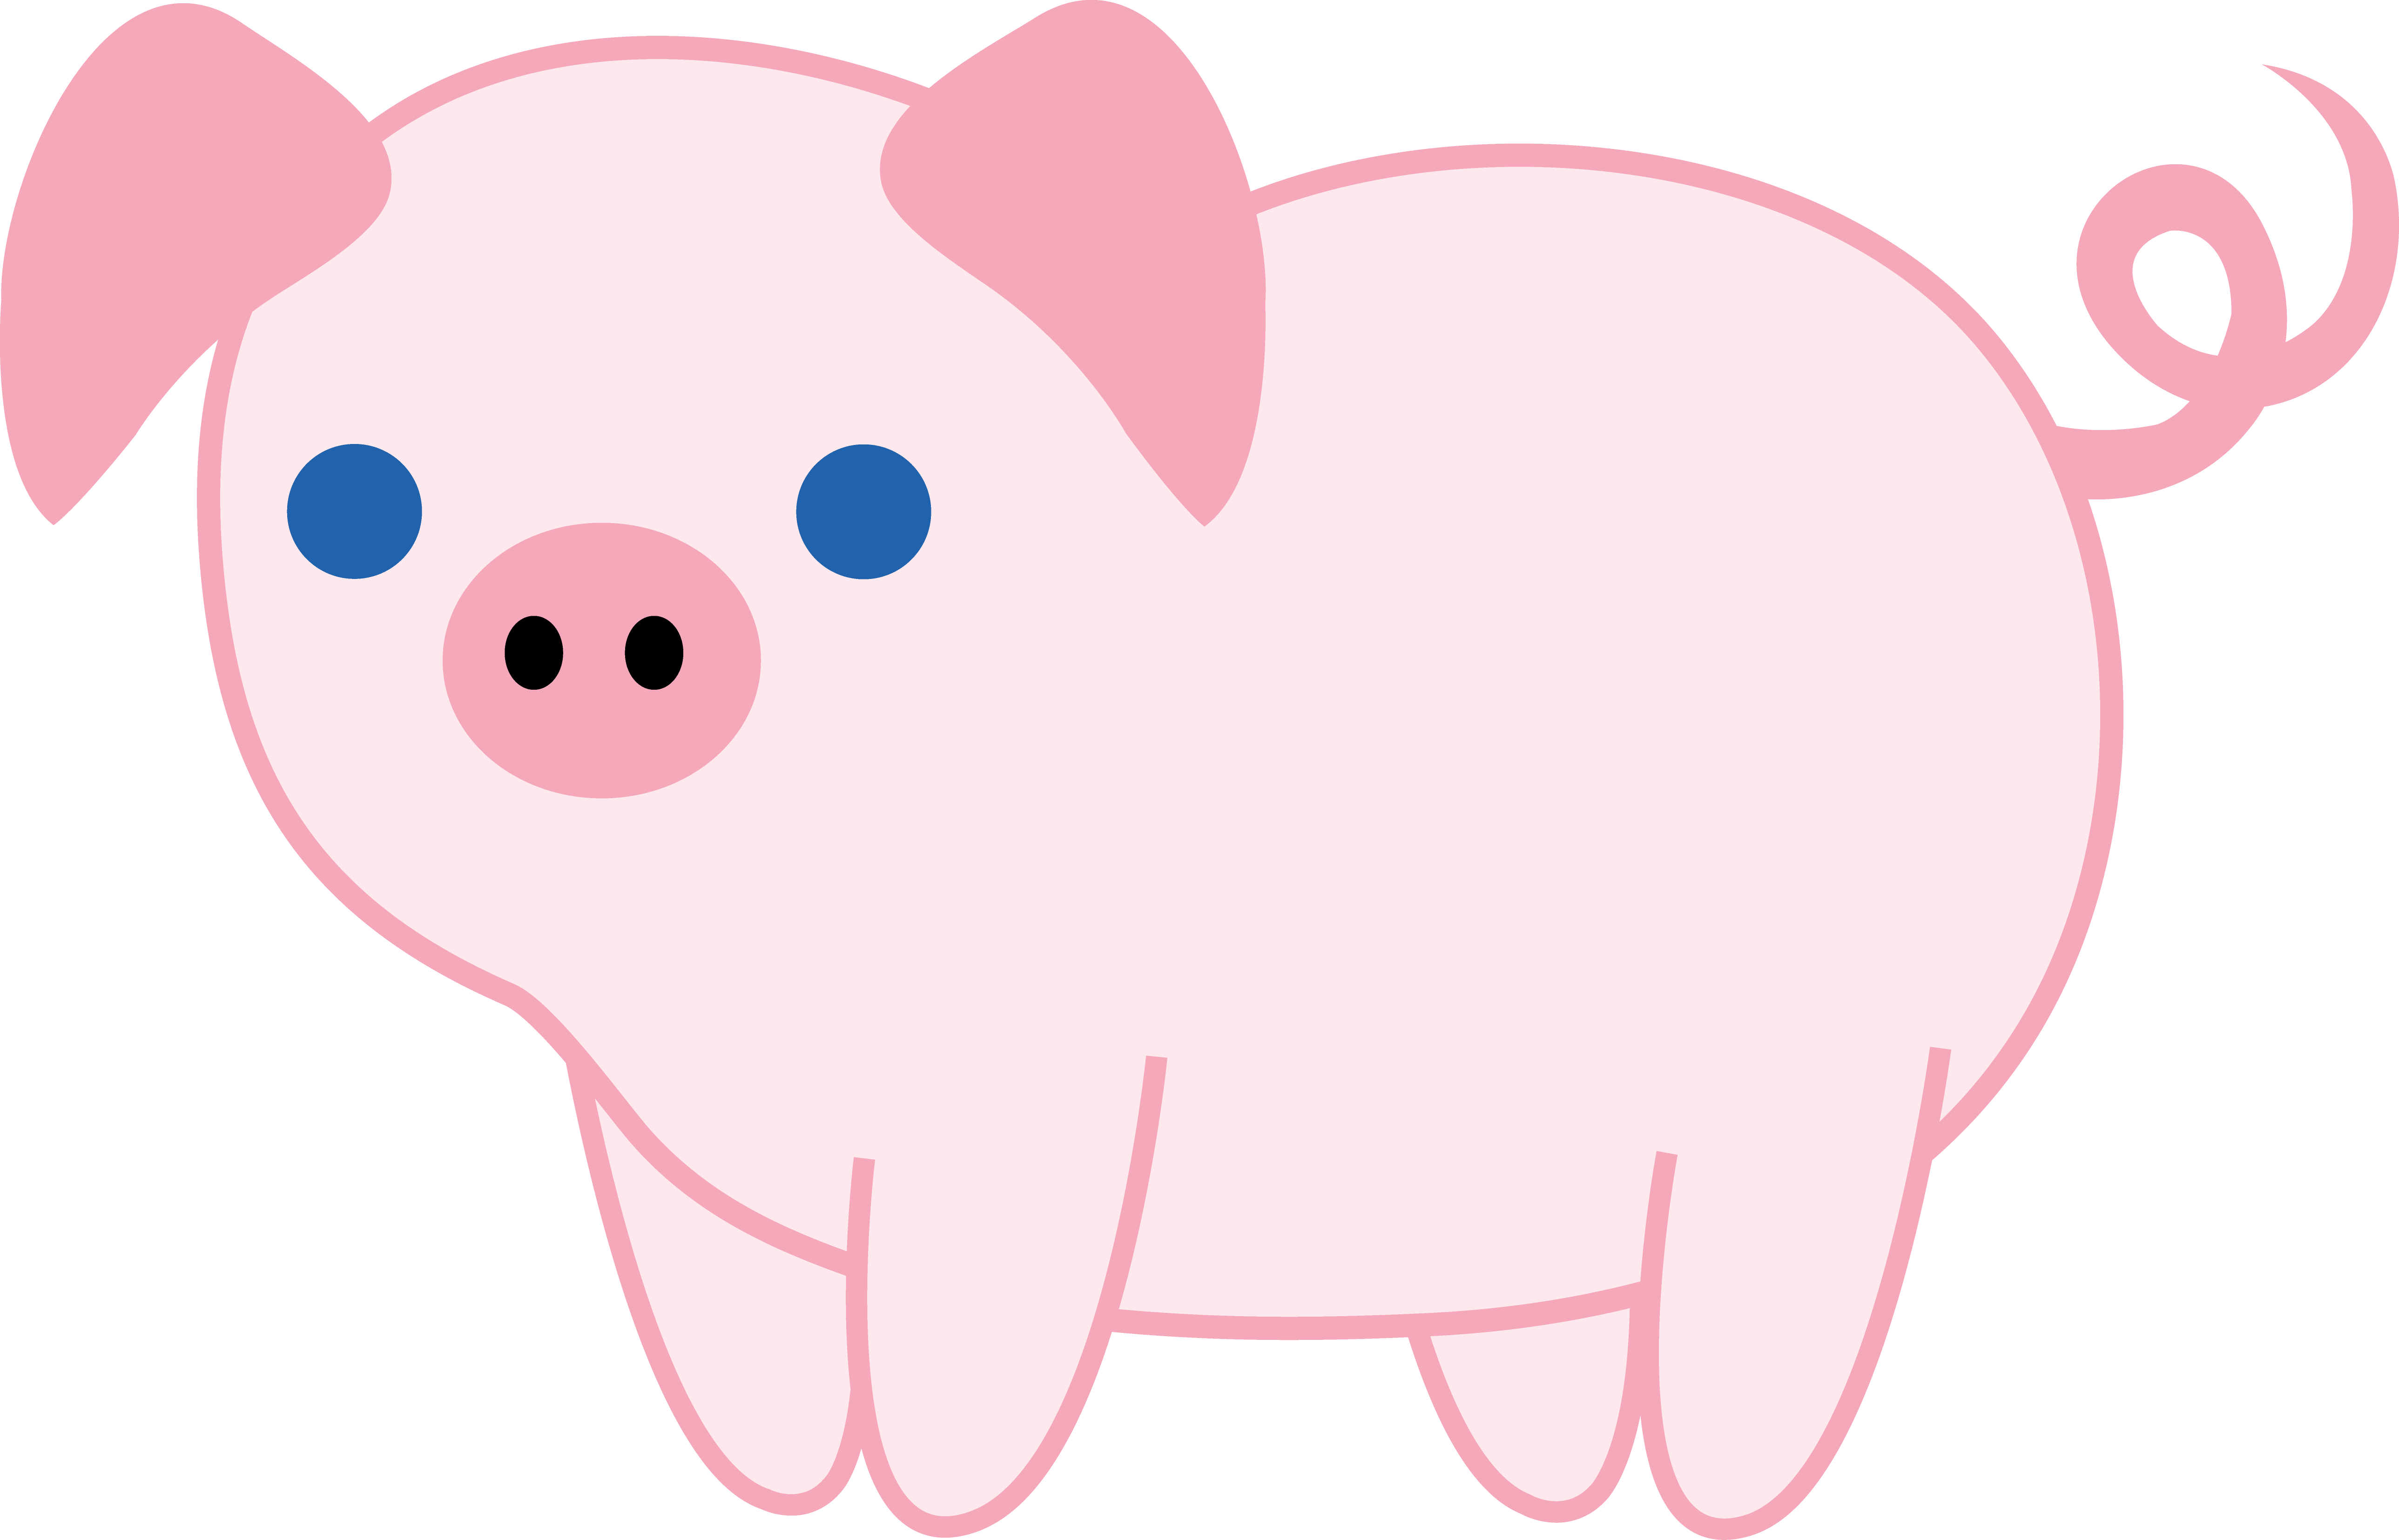 Free Cute Pig Pictures Cartoon, Download Free Cute Pig Pictures Cartoon